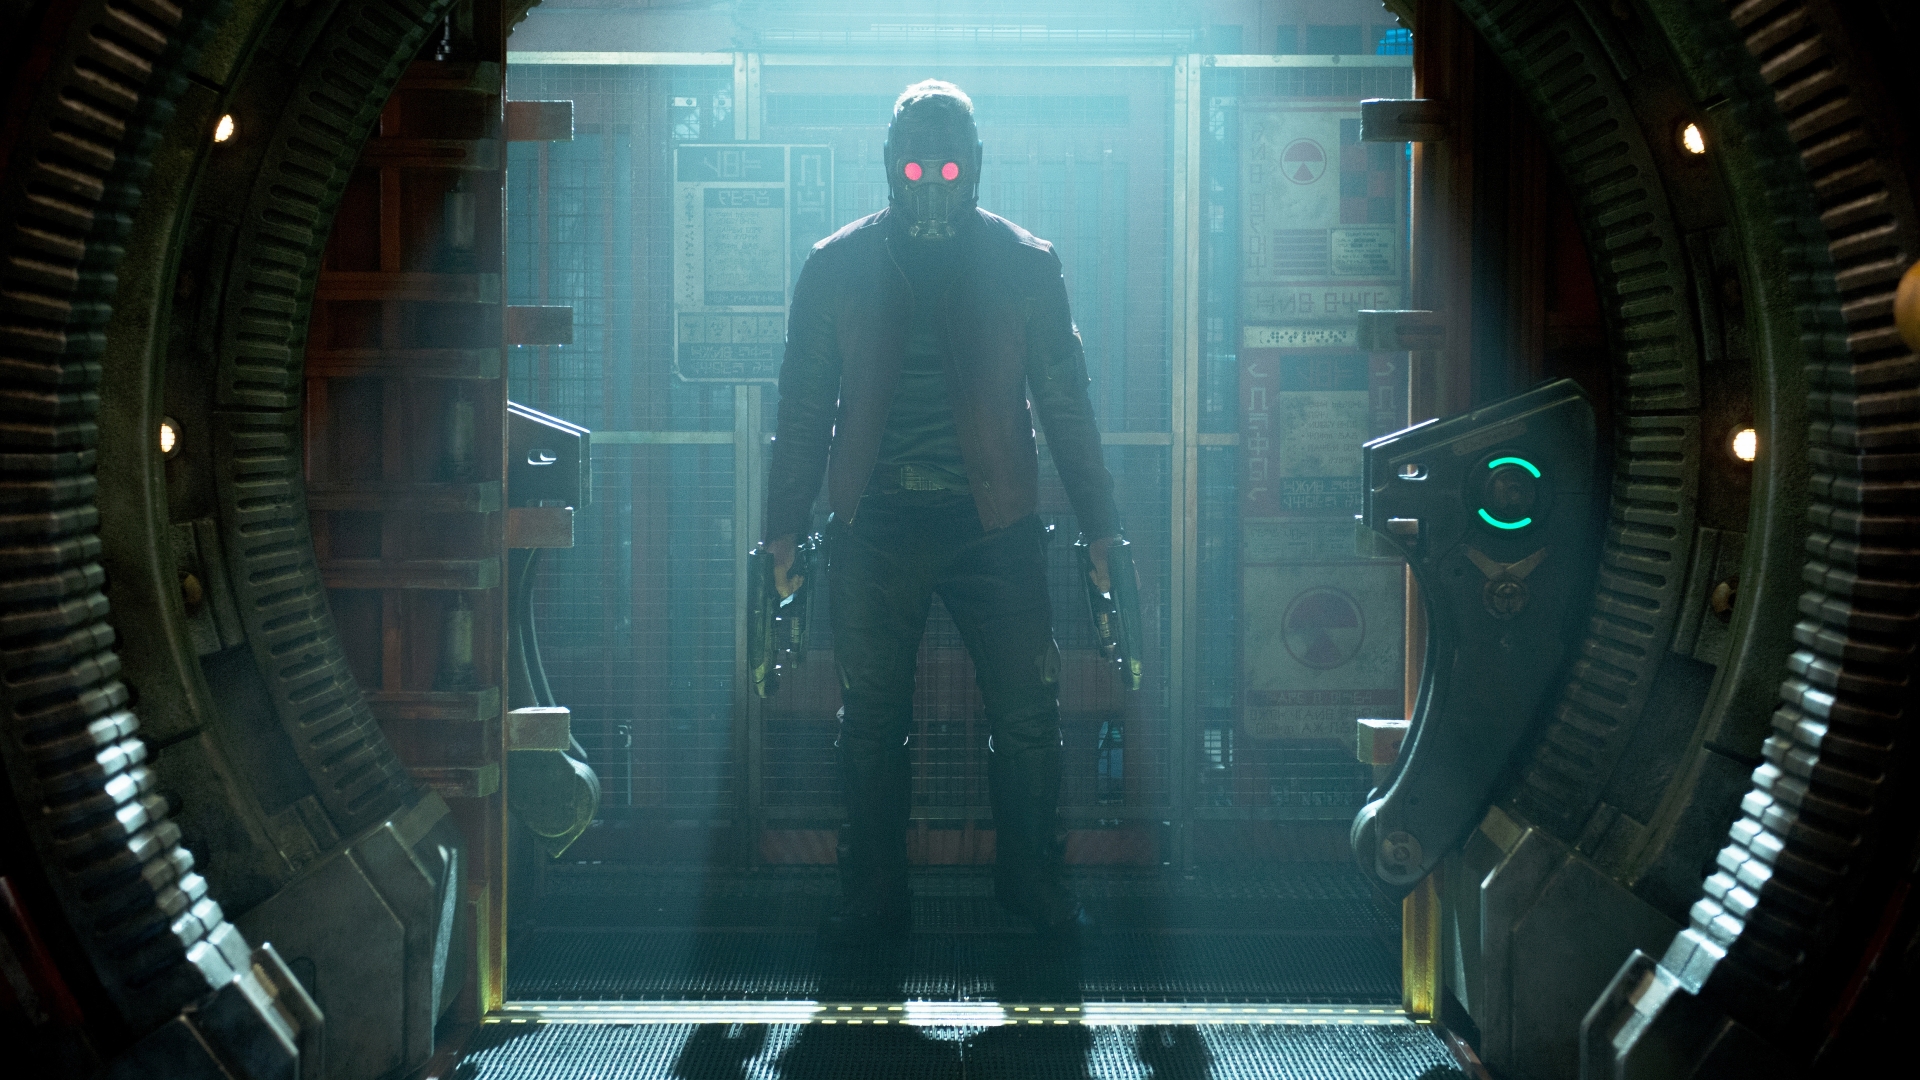 guardians of the galaxy download hd